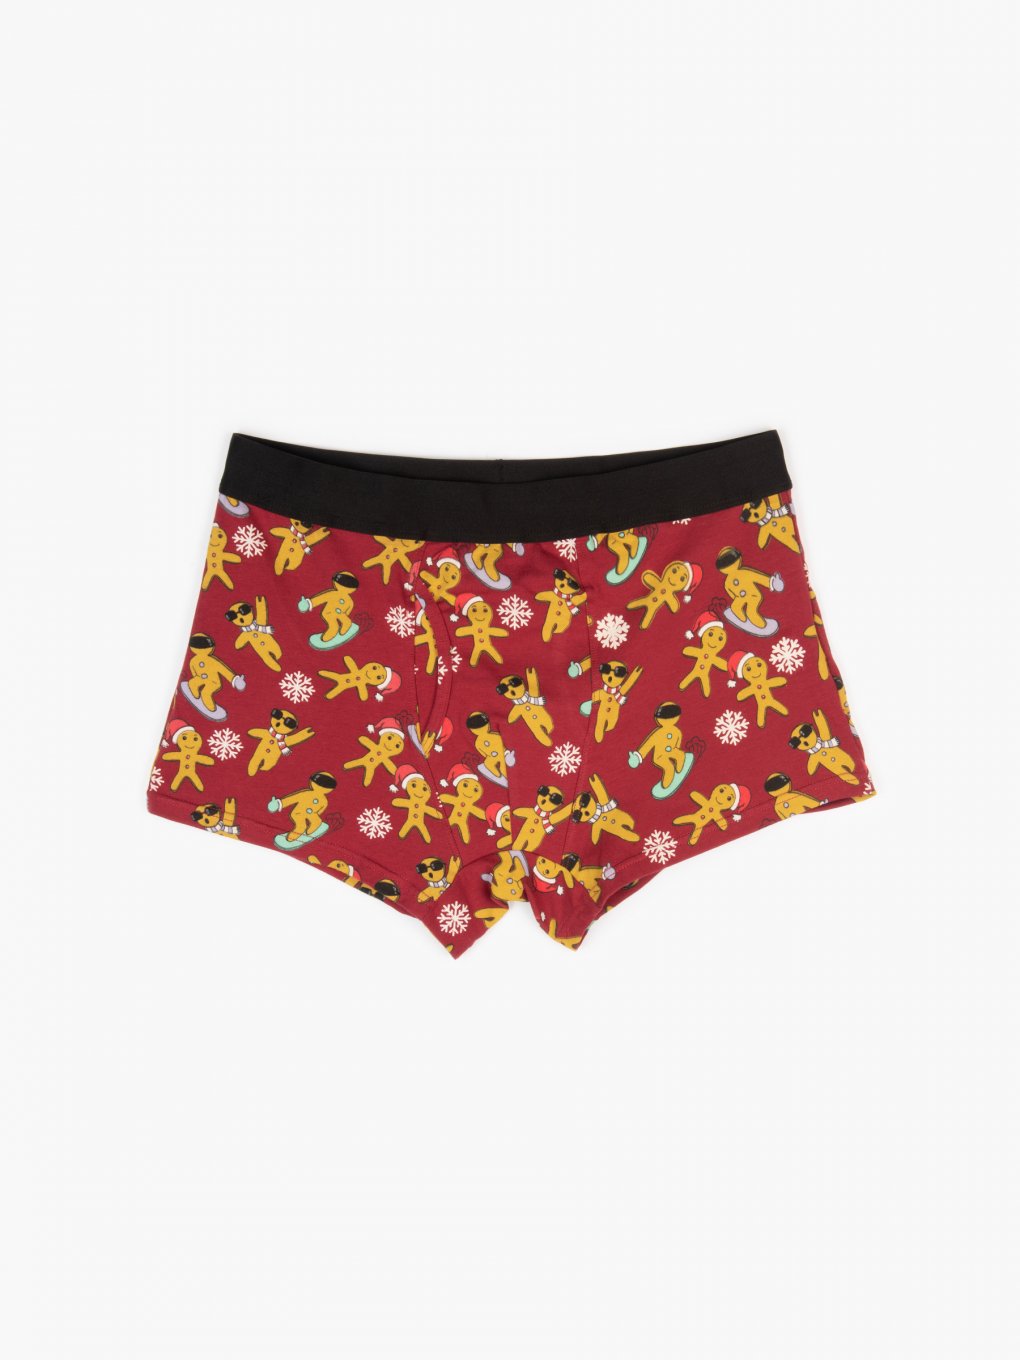 Patterned boxers